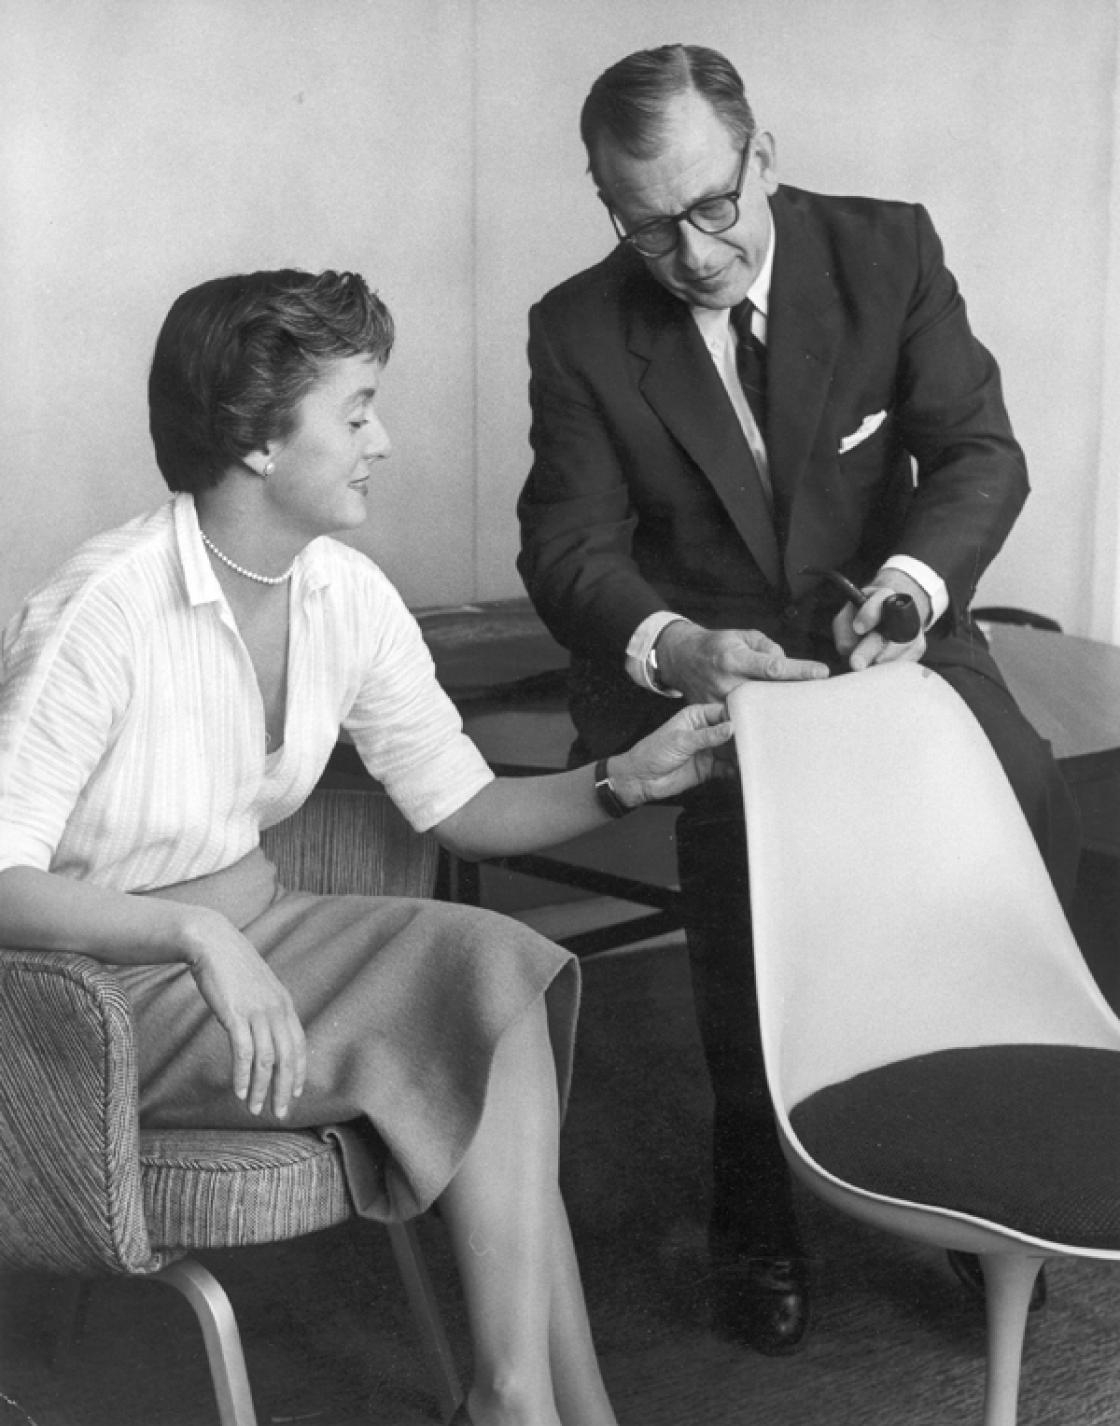 Publicity photo of Florence Schust Knoll and Eero Sarrinen with Saarinen's Pedestal Chair. 1956. Photographer: Scott Hyde. Courtesy of Cranbrook Archives.